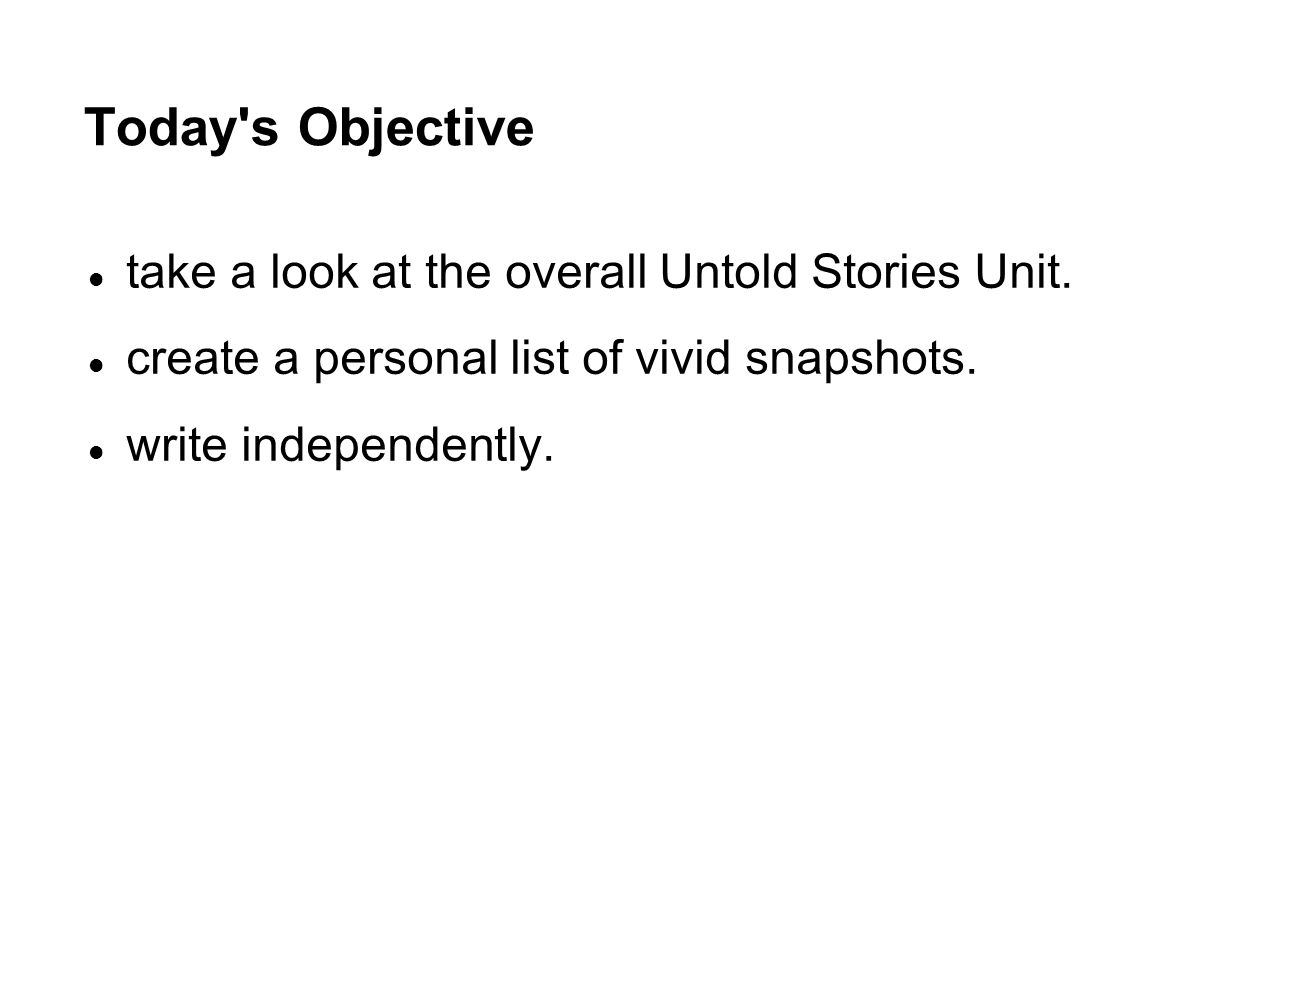 Today s Objective take a look at the overall Untold Stories Unit.